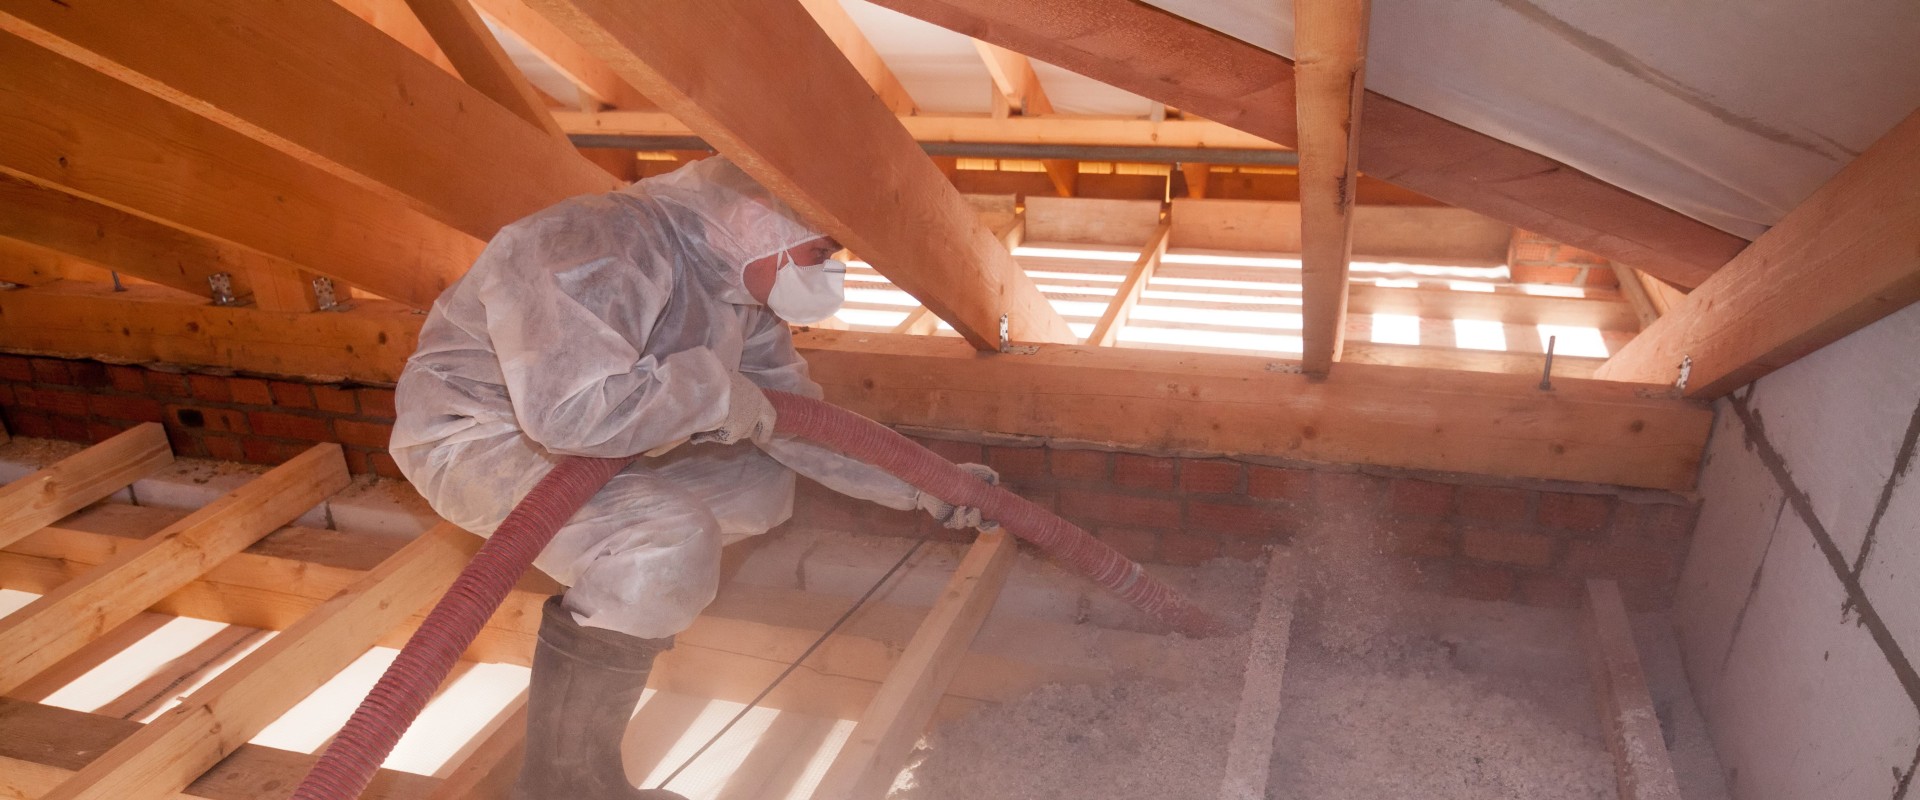 Insulating Your Attic in West Palm Beach, FL: What You Need to Know